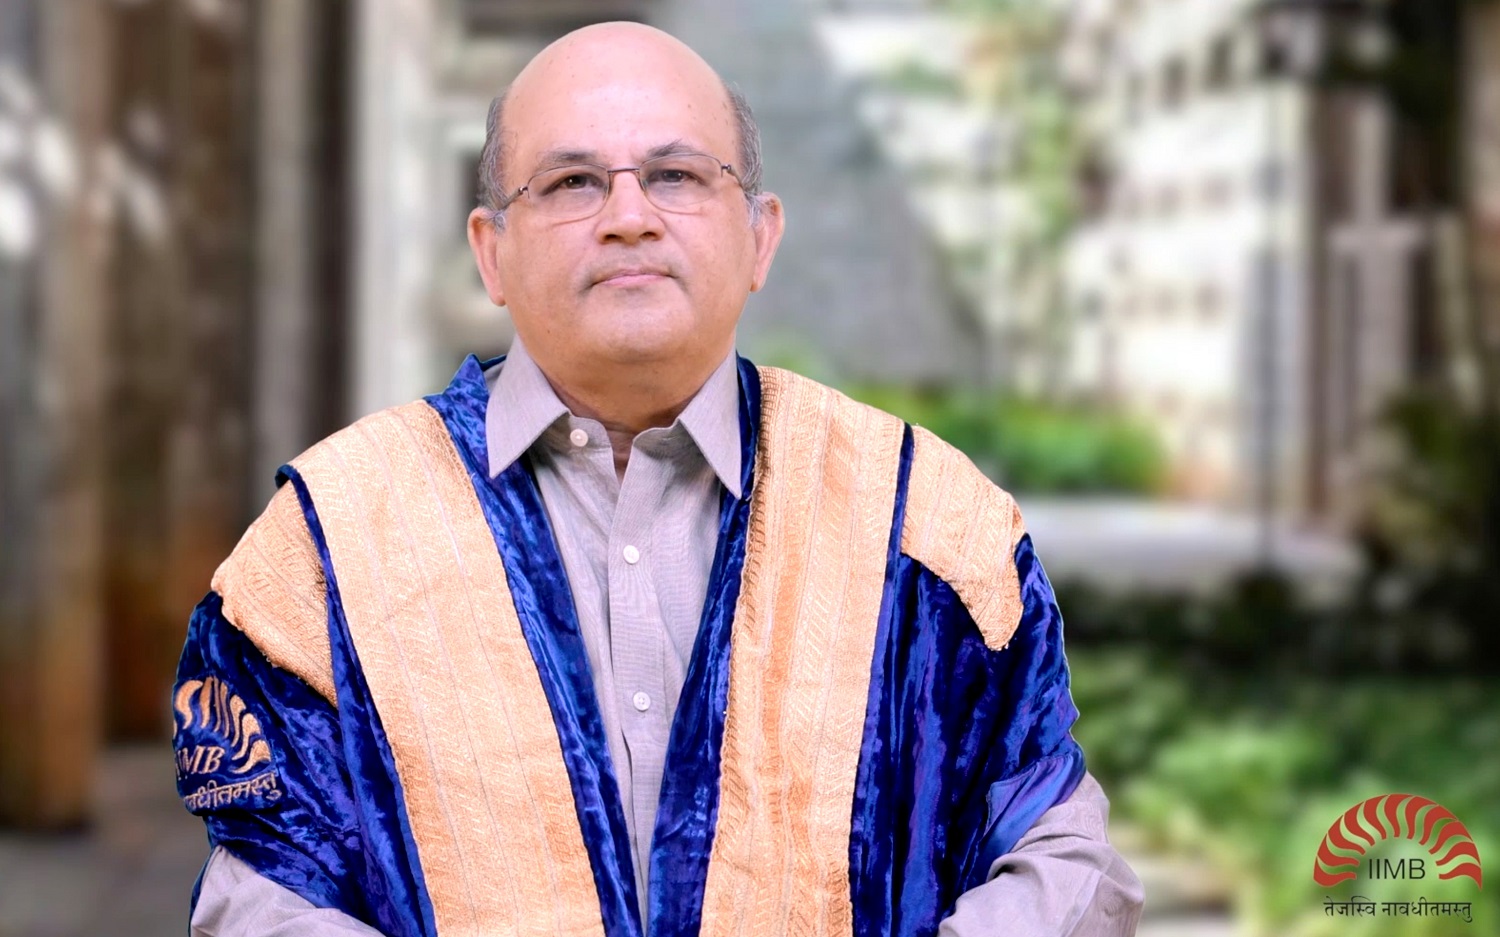 Professor Rishikesha T Krishnan, Director, IIMB, lists the awards and achievements of the faculty and students, in his address at the 46th Convocation.